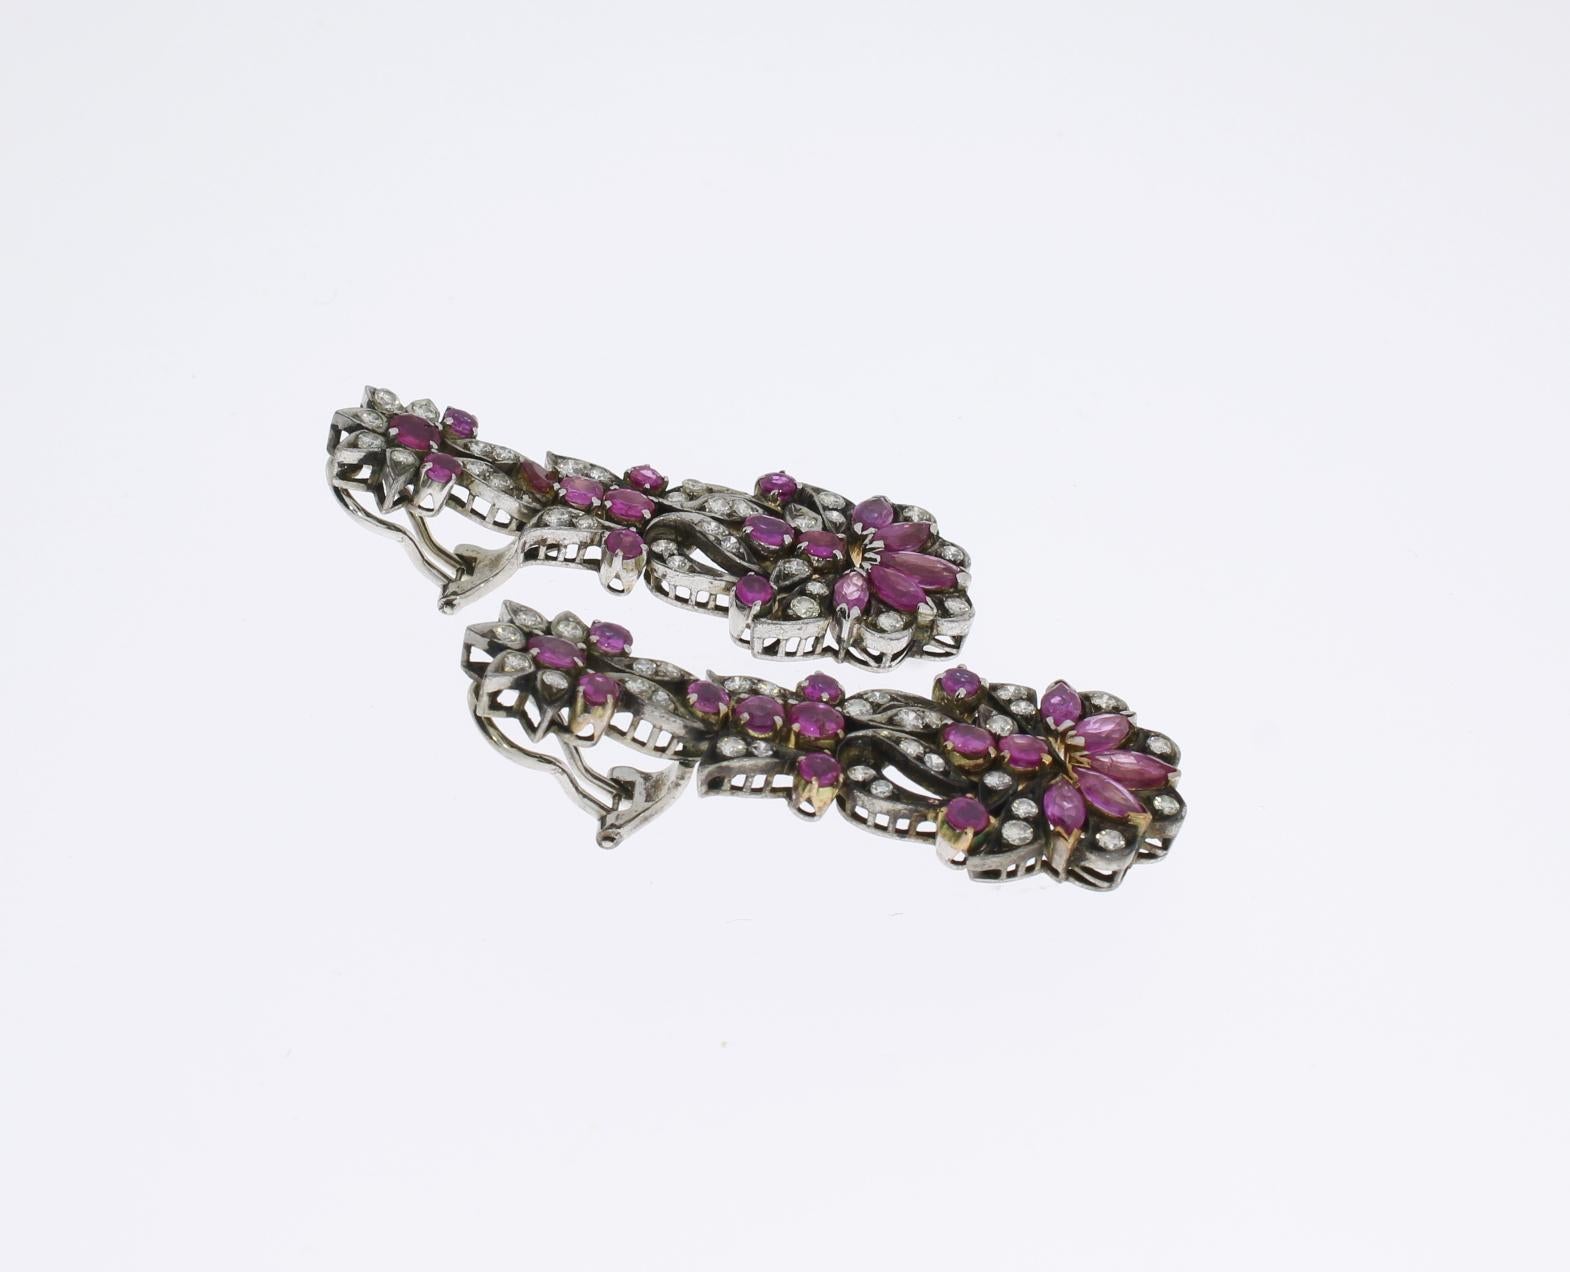 Europe, 1920s. Flower design set with 34 navette-cut and round-cut pink sapphires overall approximately 3,50 ct. and 62 single-cut and full-cut diamonds with a total weight of ca. 1,20 ct. Mounted in silver. Weight: 18,17 grams. Length: 1.97 in ( 5